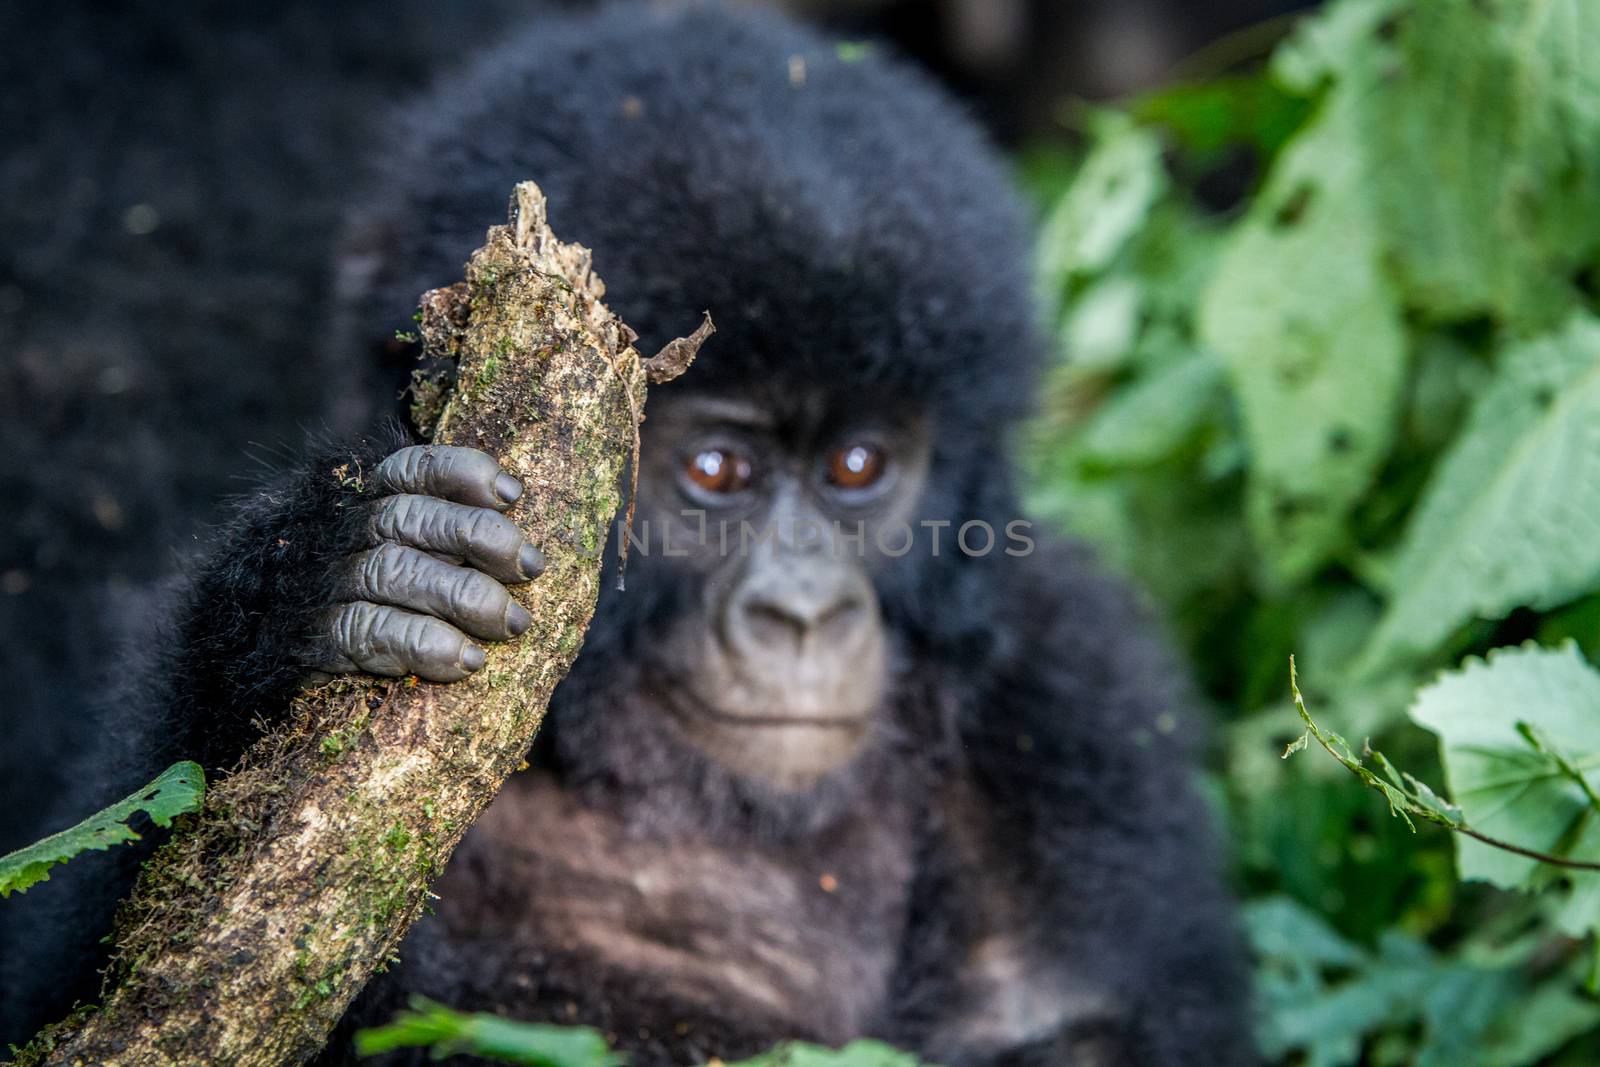 Close up of the hand of a baby Mountain gorilla in the Virunga National Park, Democratic Republic Of Congo.